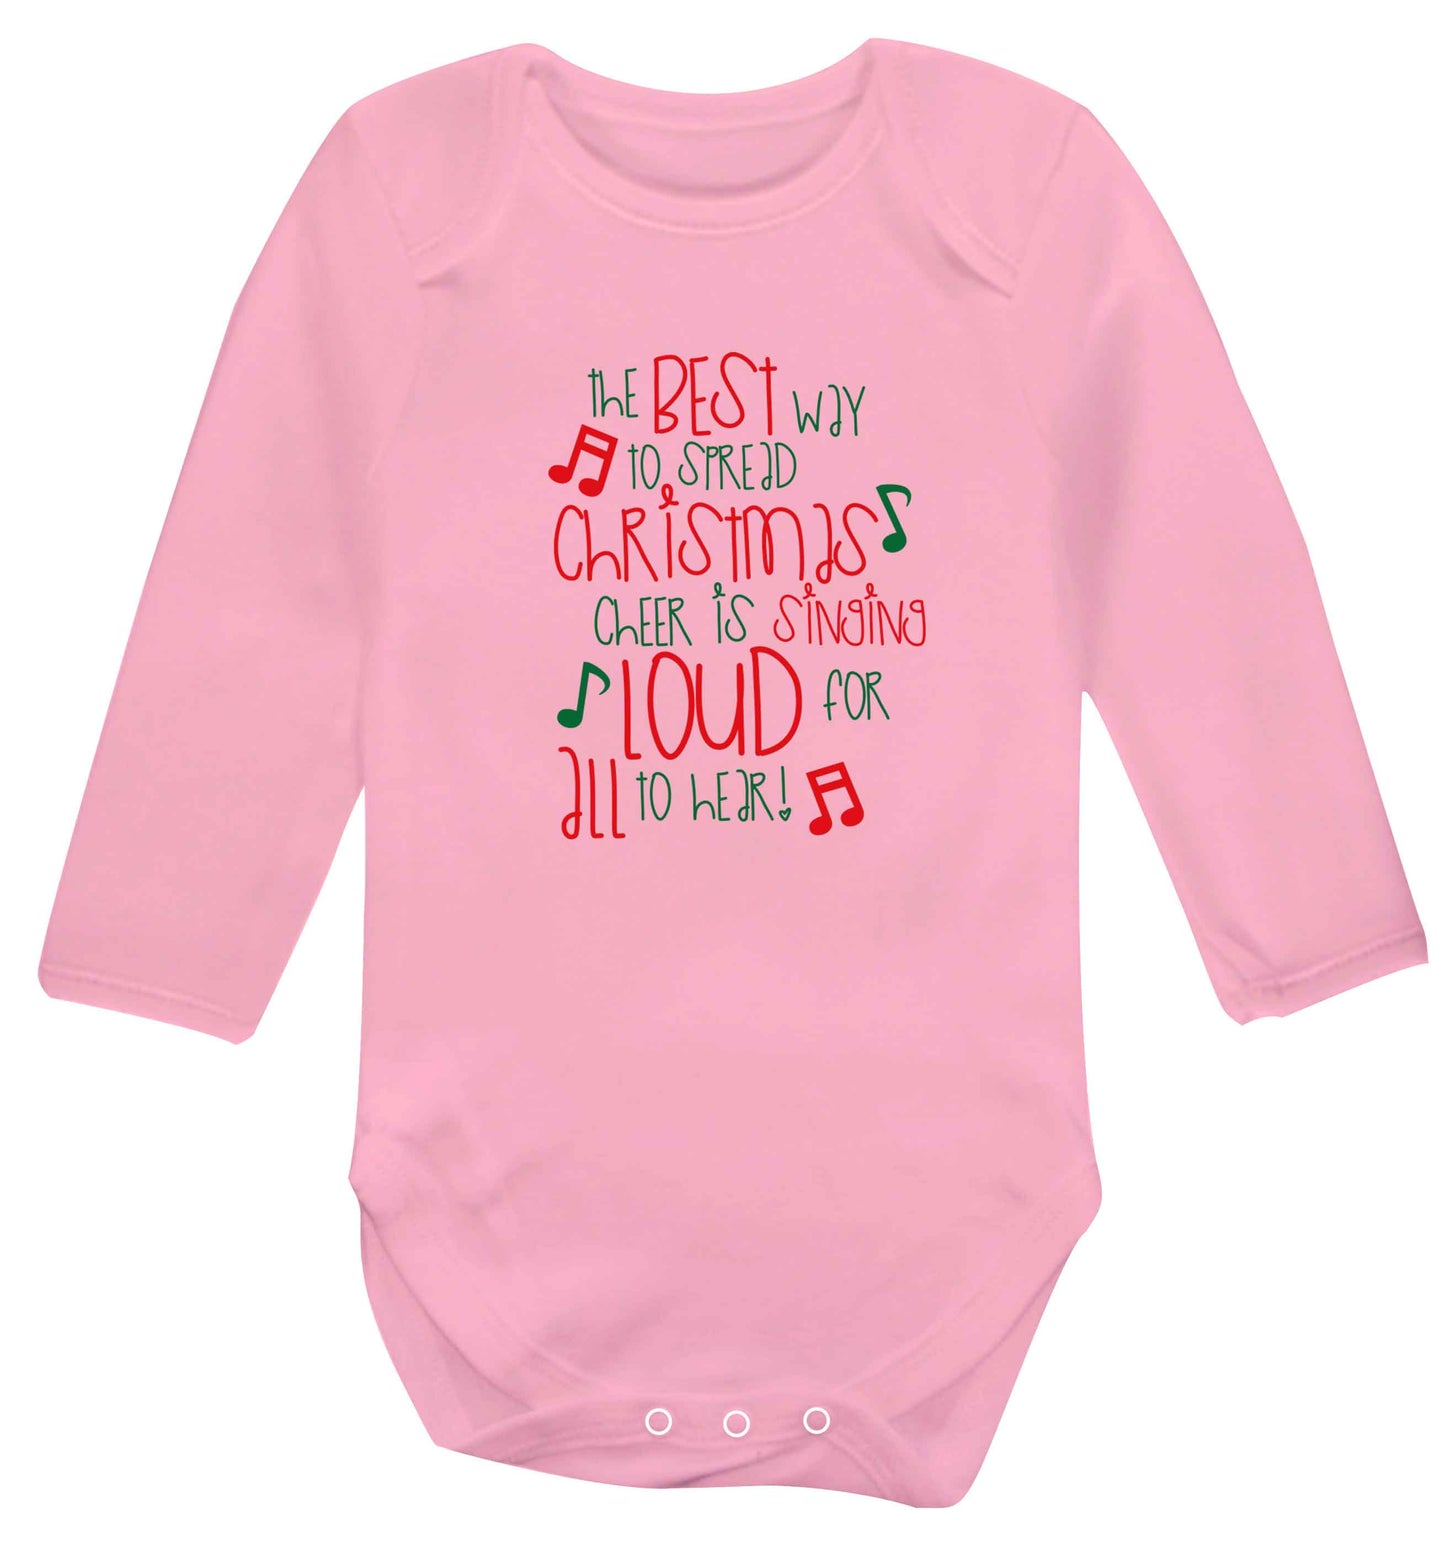 The best way to spread Christmas cheer is singing loud for all to hear baby vest long sleeved pale pink 6-12 months